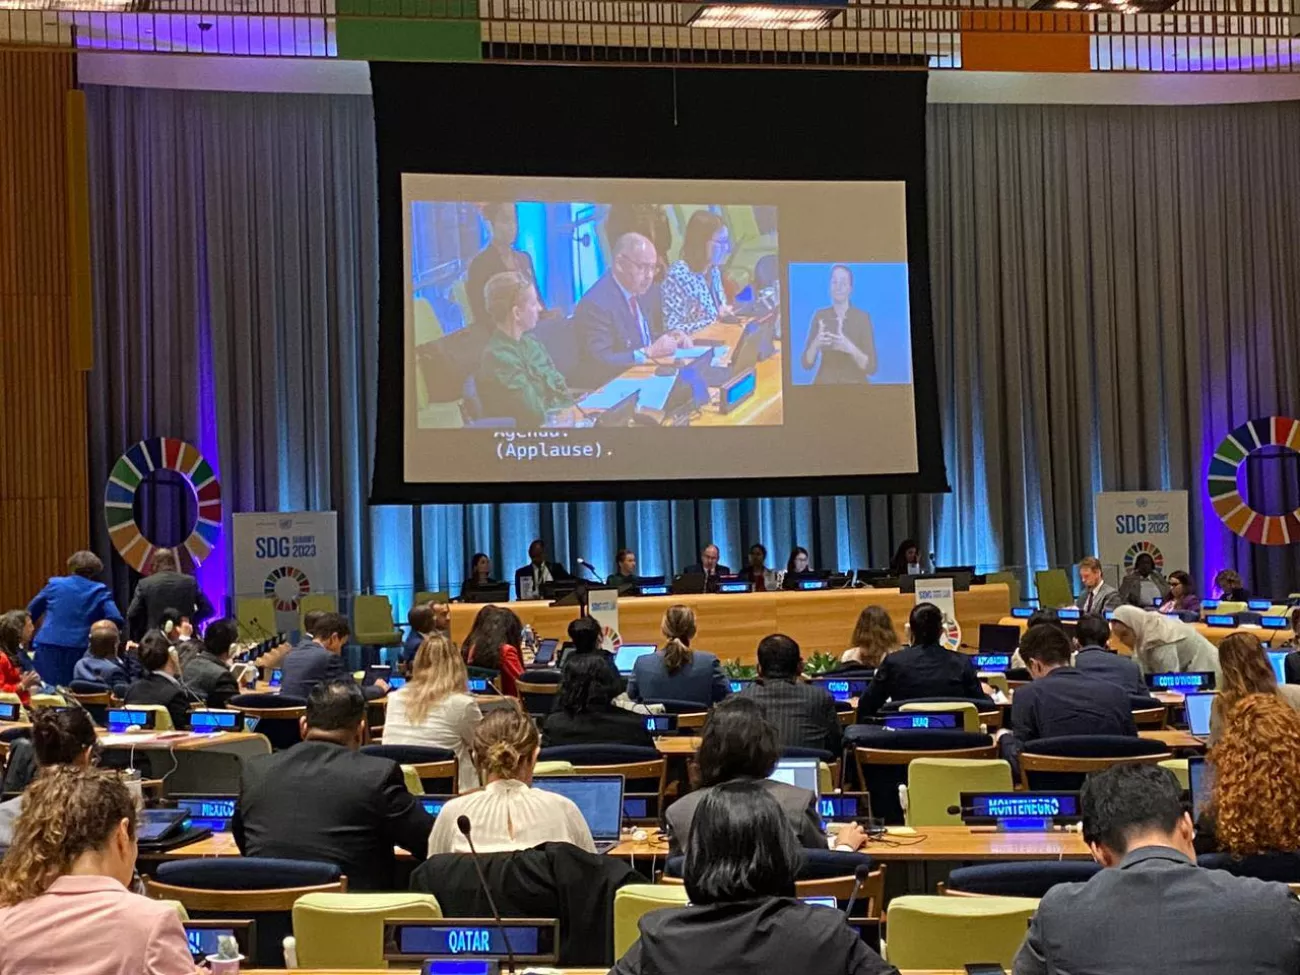 Cook Islands advocate for climate action funding for innovative  Pacific-tailored solutions at 78th United Nations General Assembly